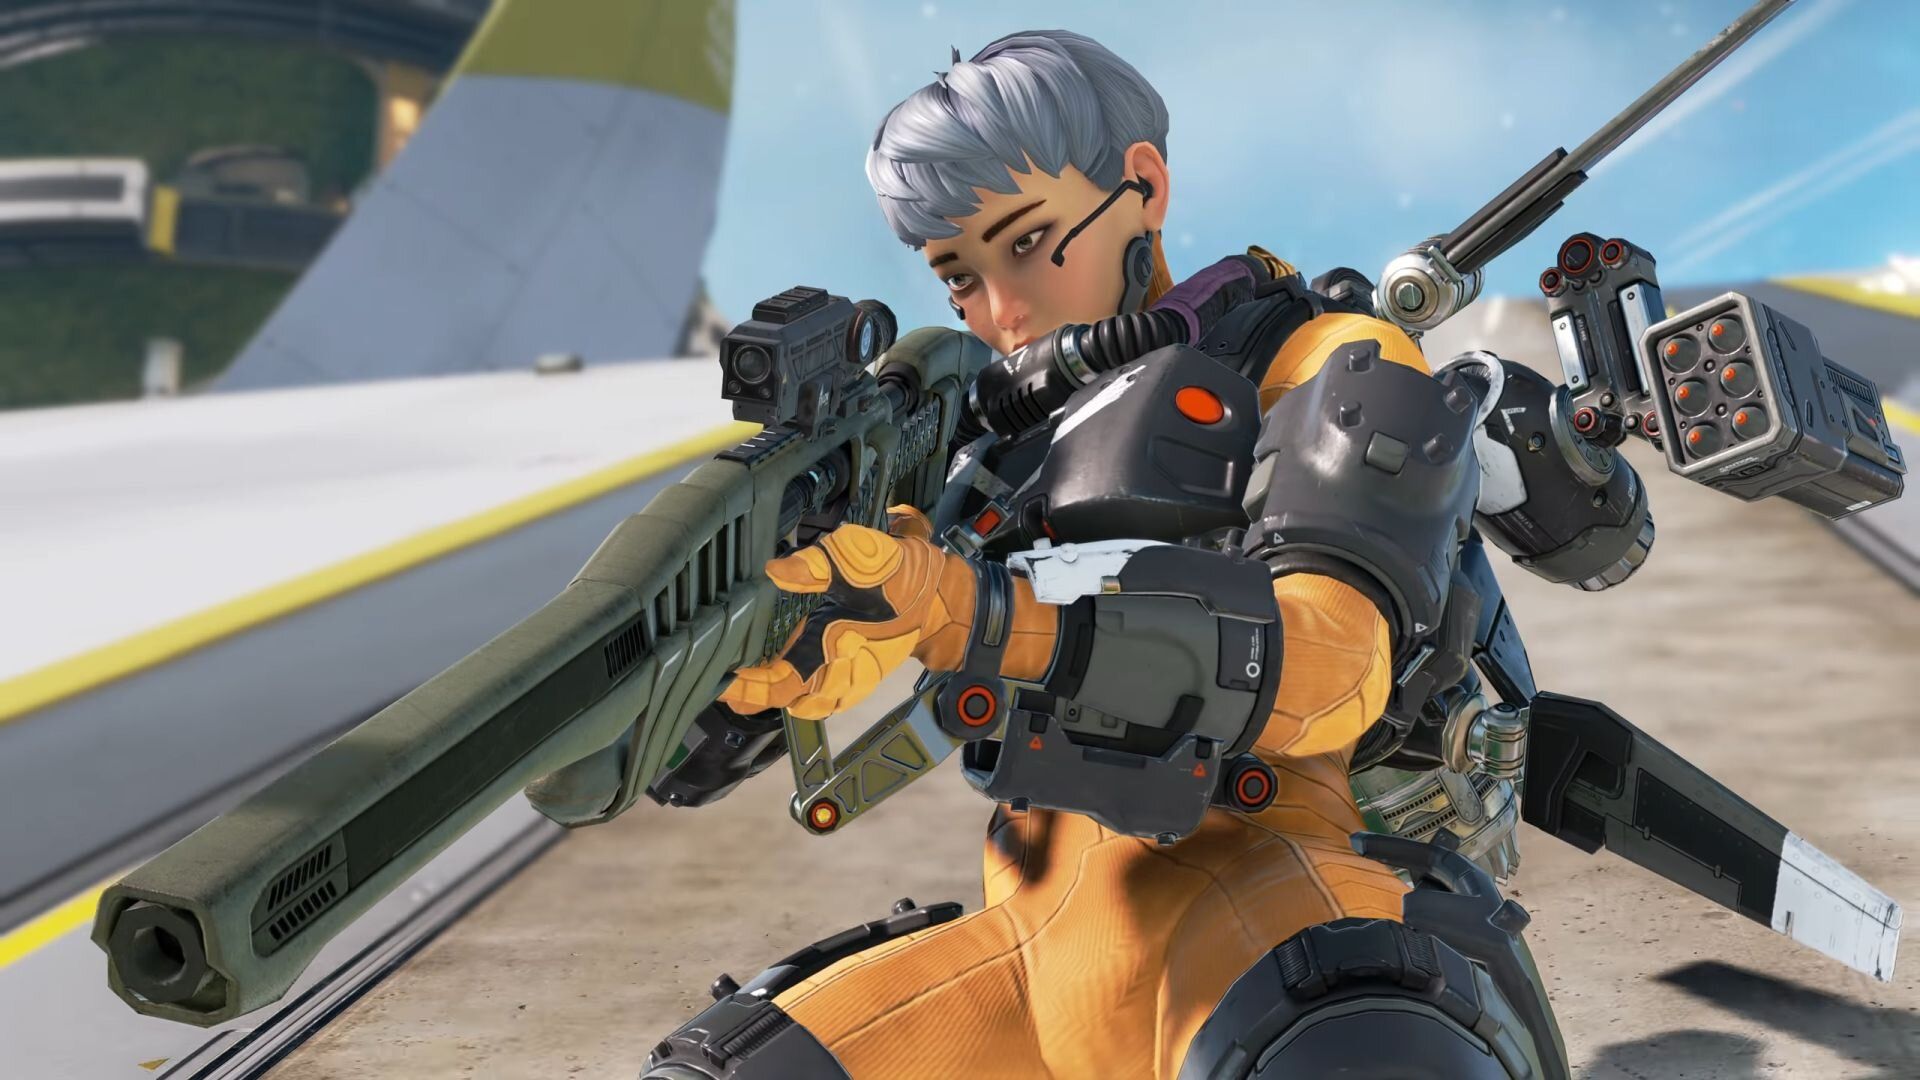 Learn All About Valkyrie in New APEX LEGENDS: LEGACY Showcase